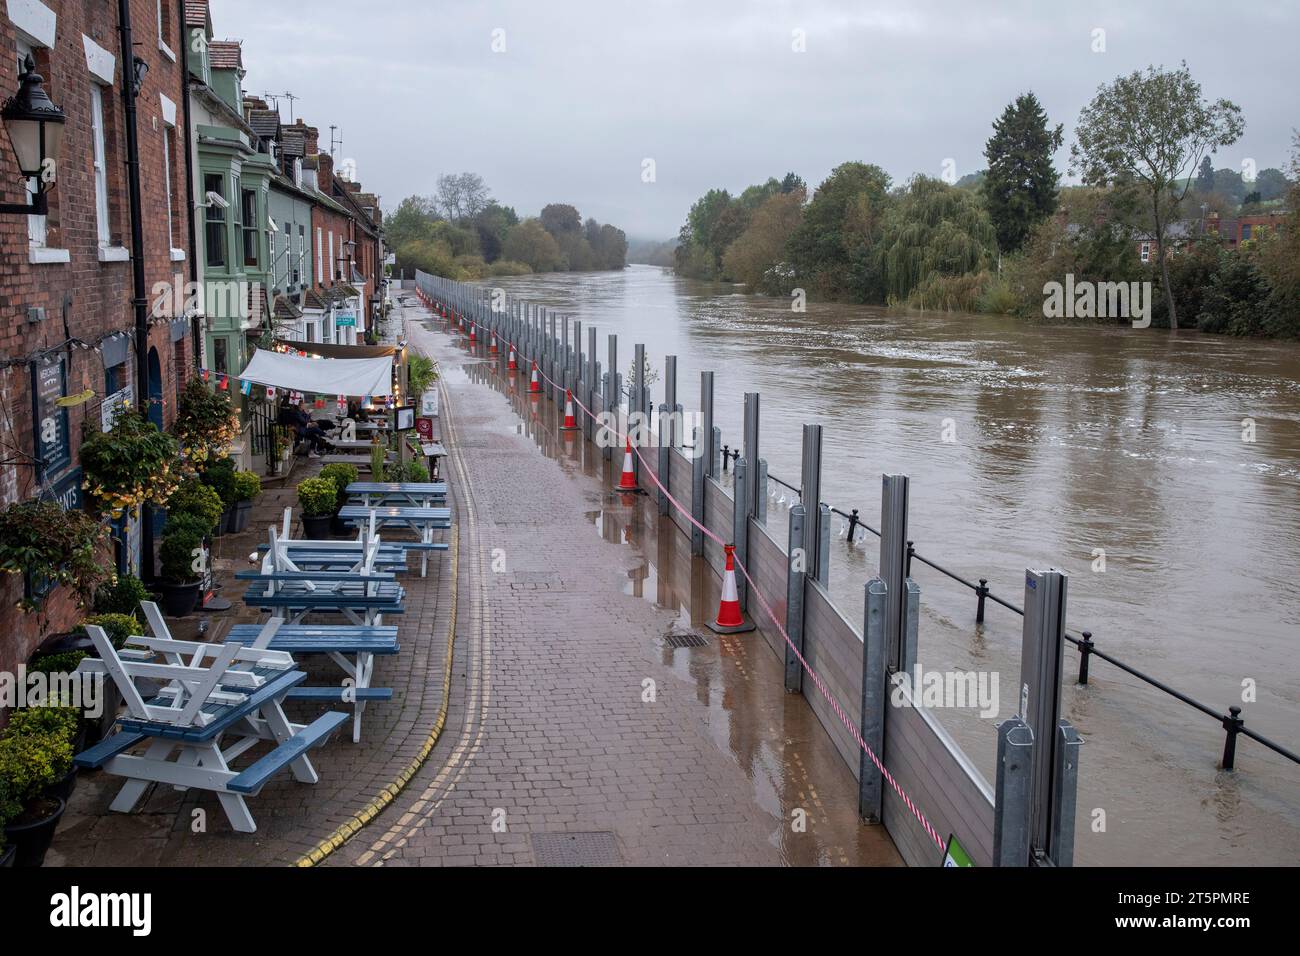 Flood barriers keep the high water level on the River Severn from flooding Severn Side North in Bewdley, Worcestershire, after Storm Babet. Stock Photo